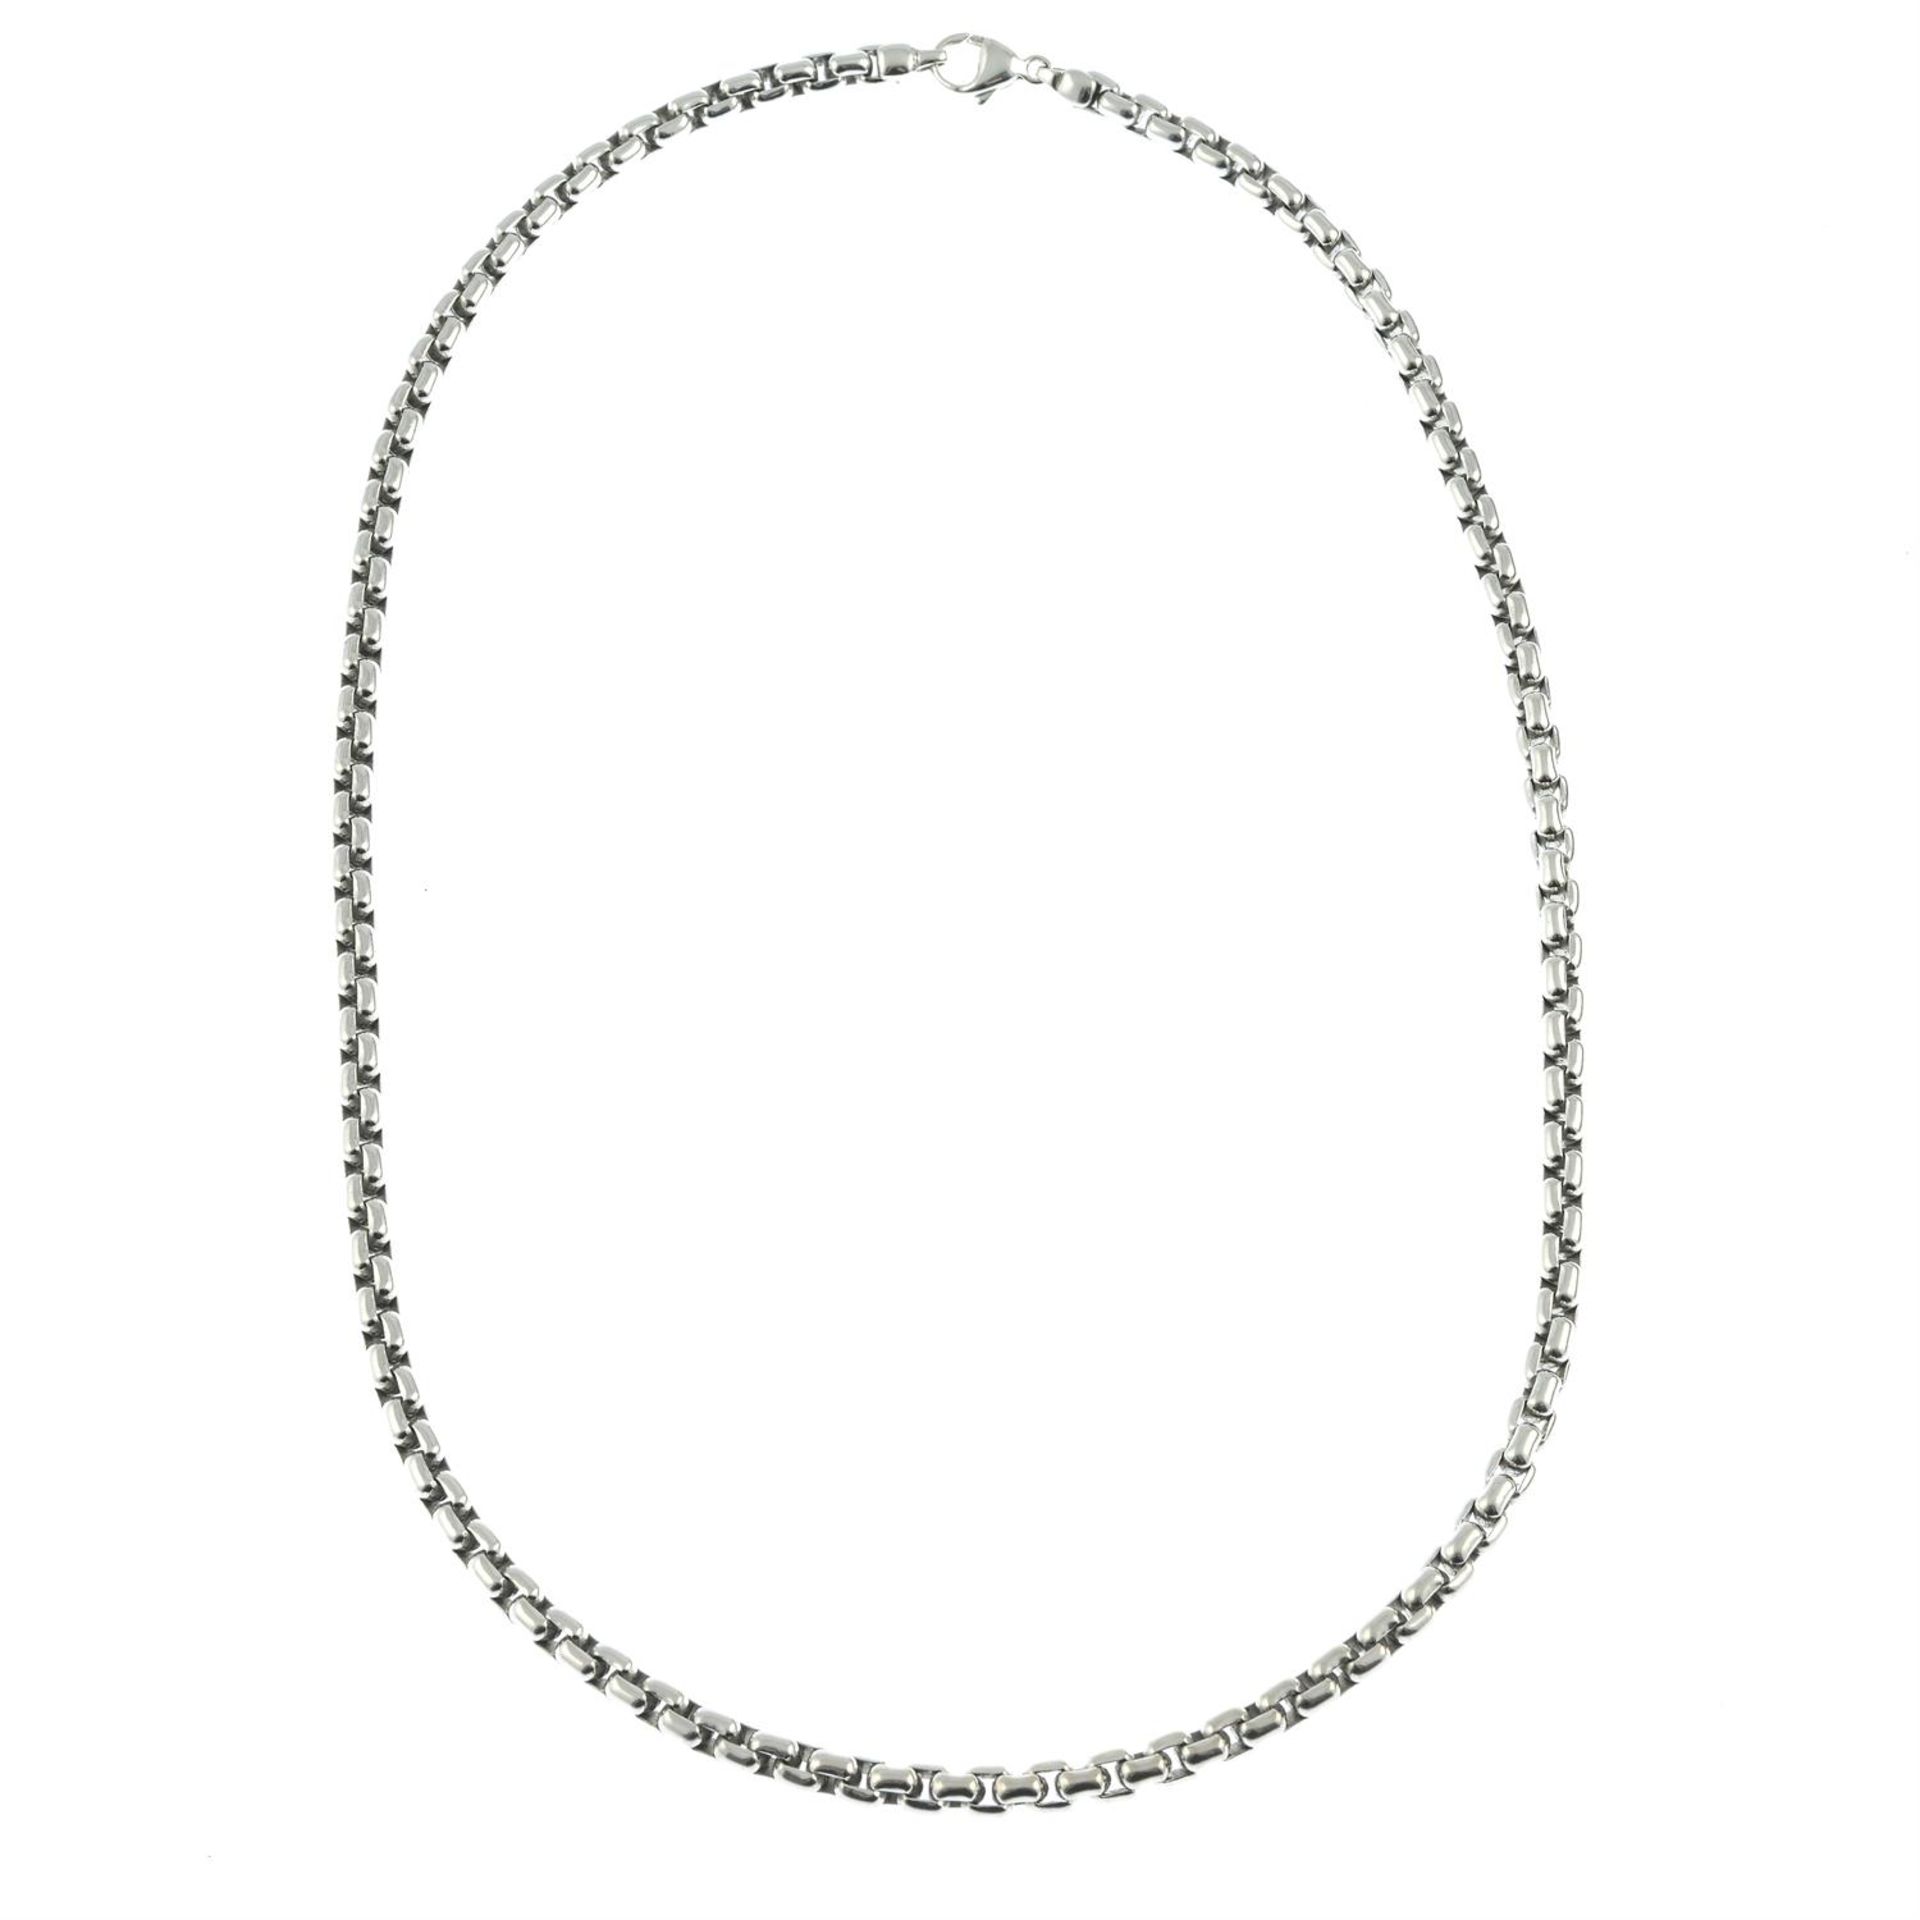 A 'Venetian Link' necklace, by Tiffany & Co. - Image 3 of 4